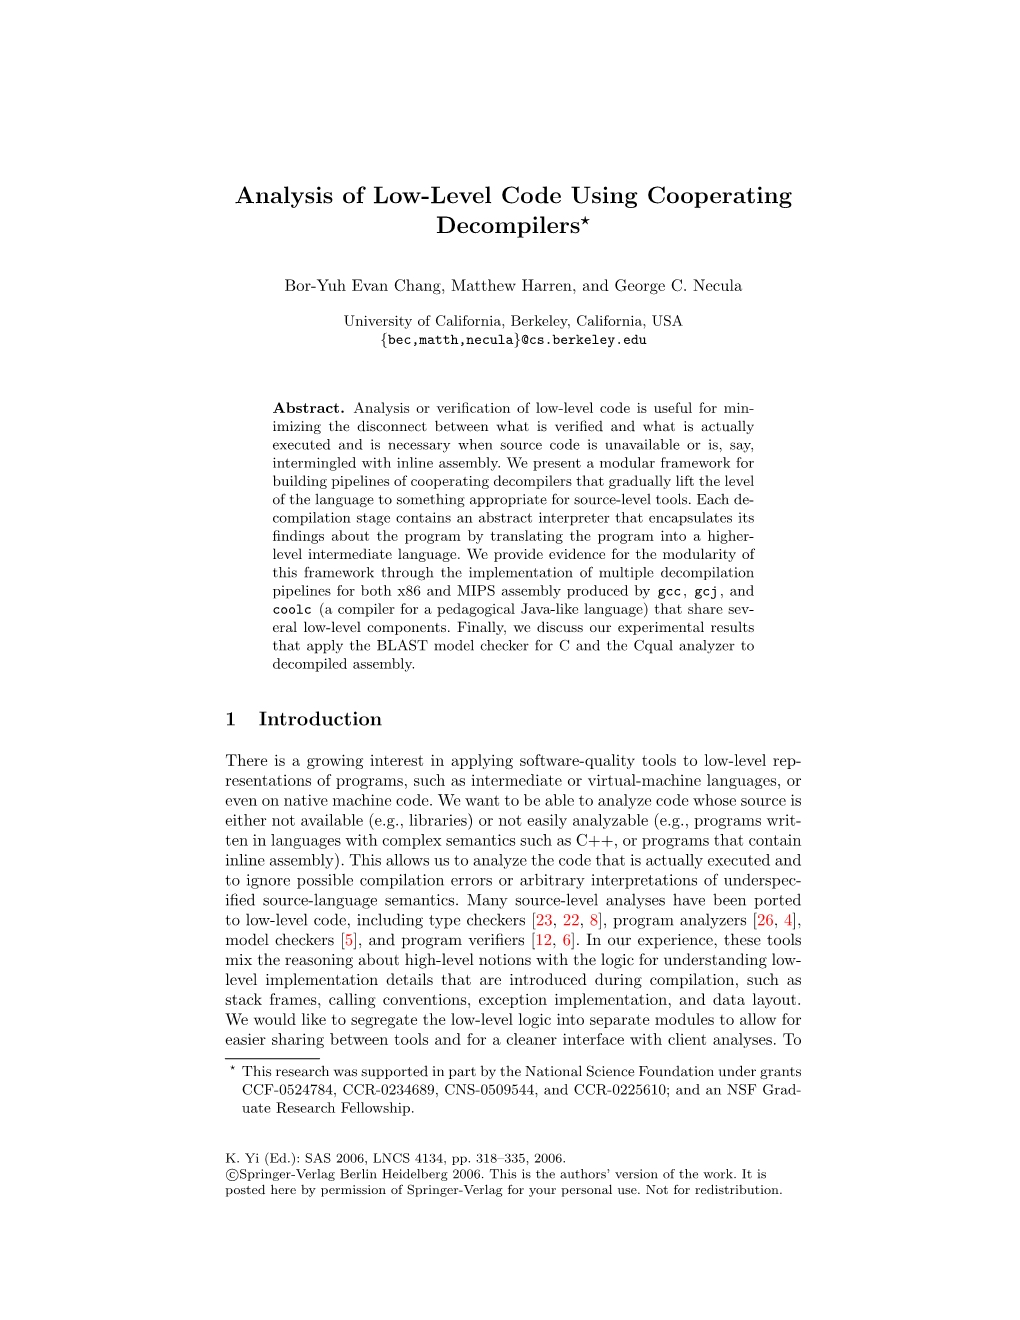 Analysis of Low-Level Code Using Cooperating Decompilers?